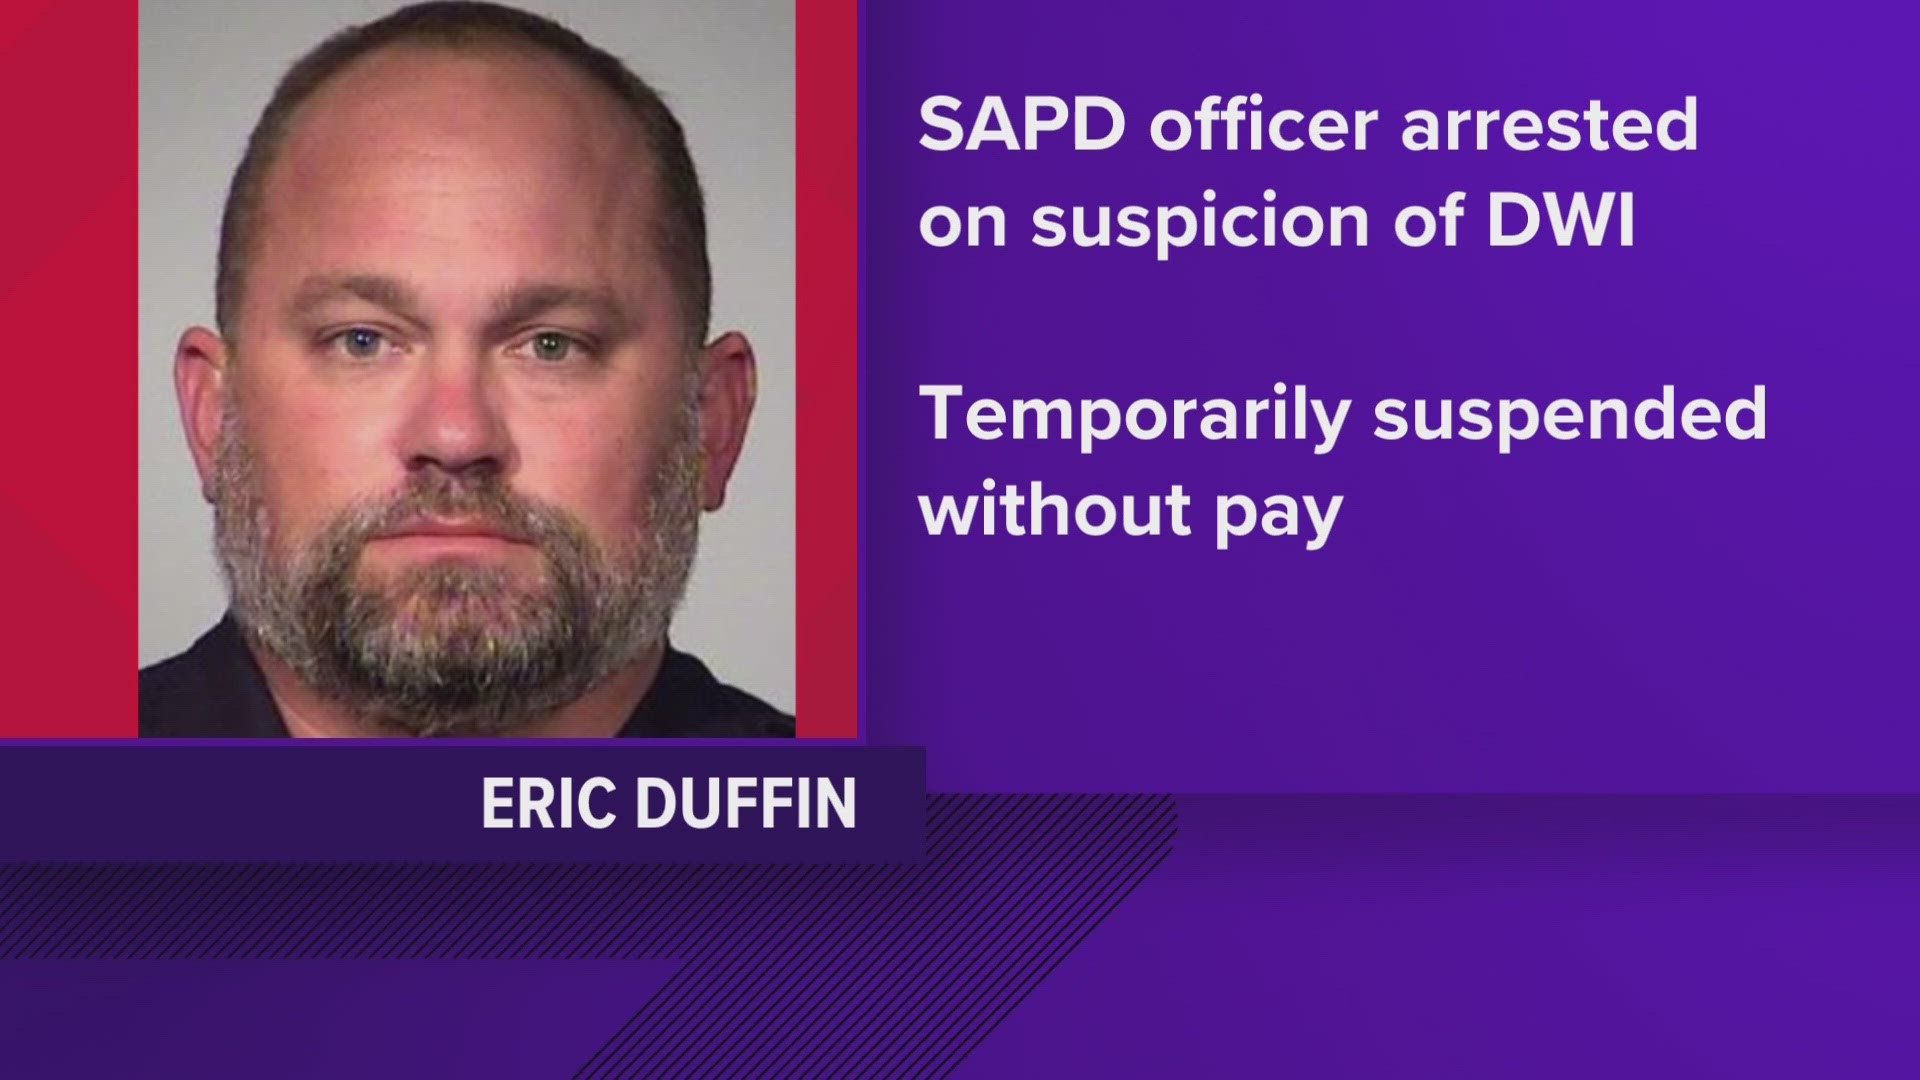 Eric Duffin, a 16-year veteran of the force, will be immediately temporarily suspended without pay.